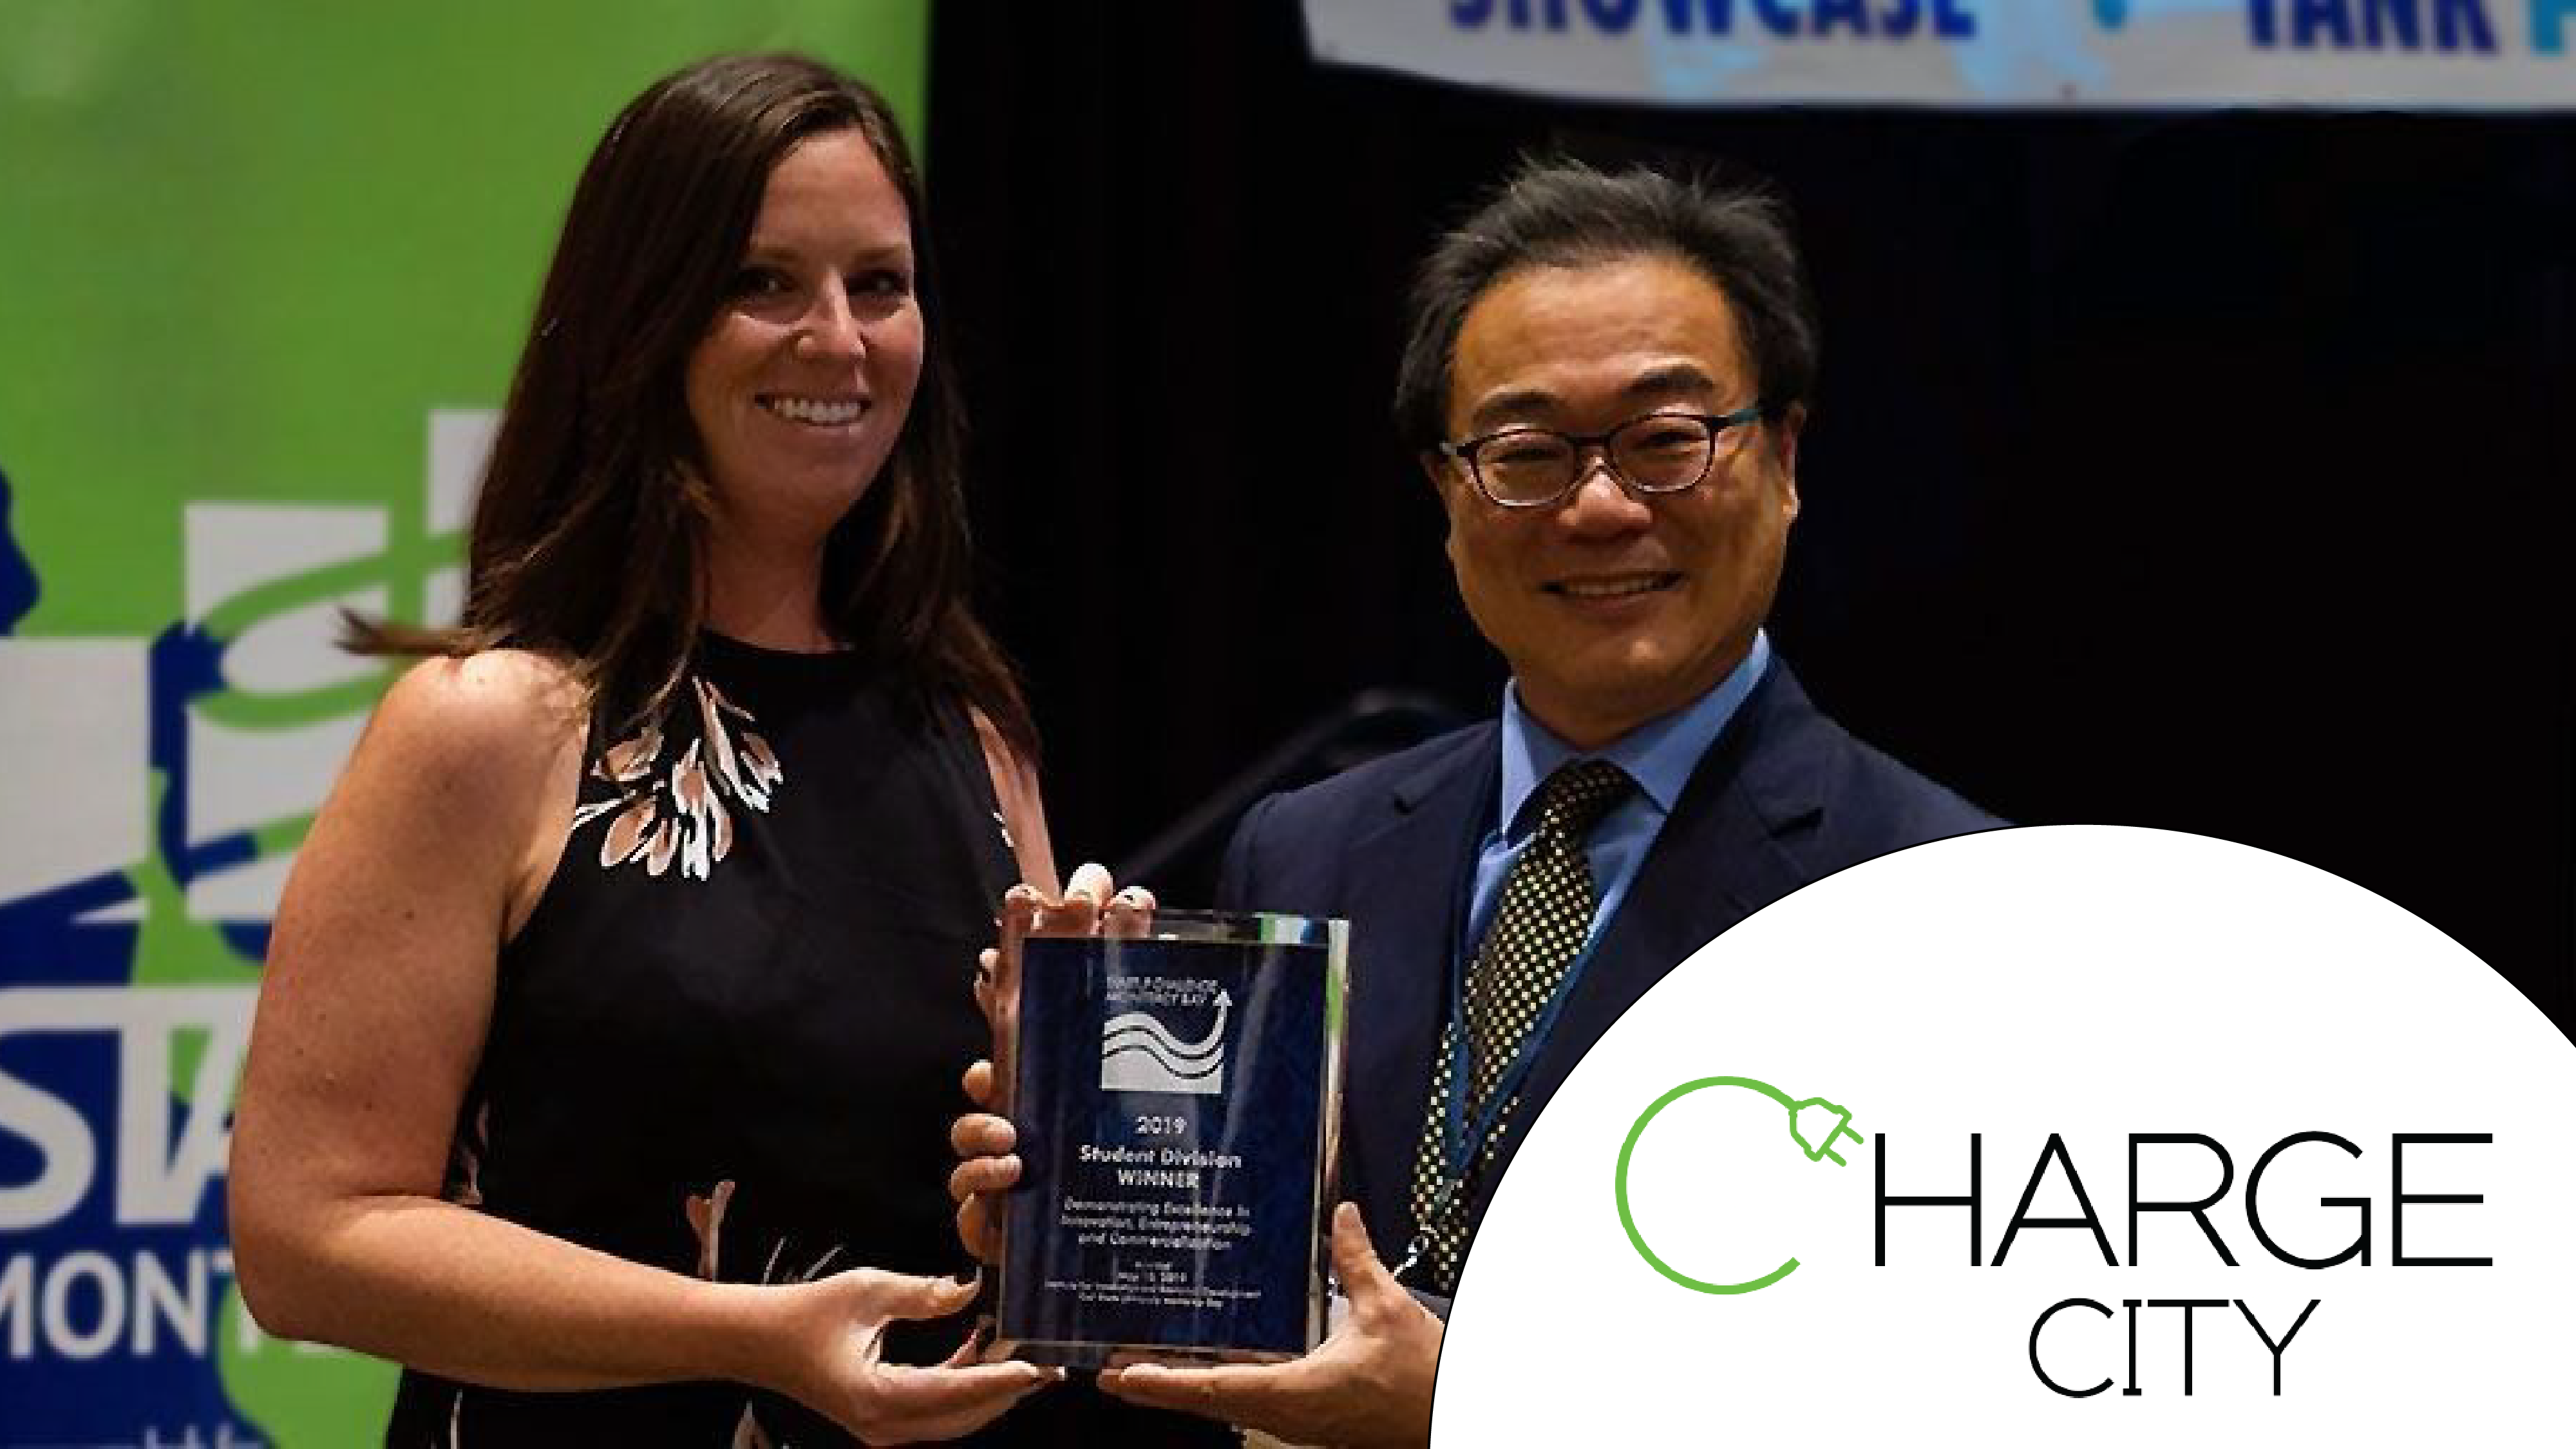 2019 Startup Challenge Student Division Winner - Charge City - Erin Lannon and Eric Tao holding trophy